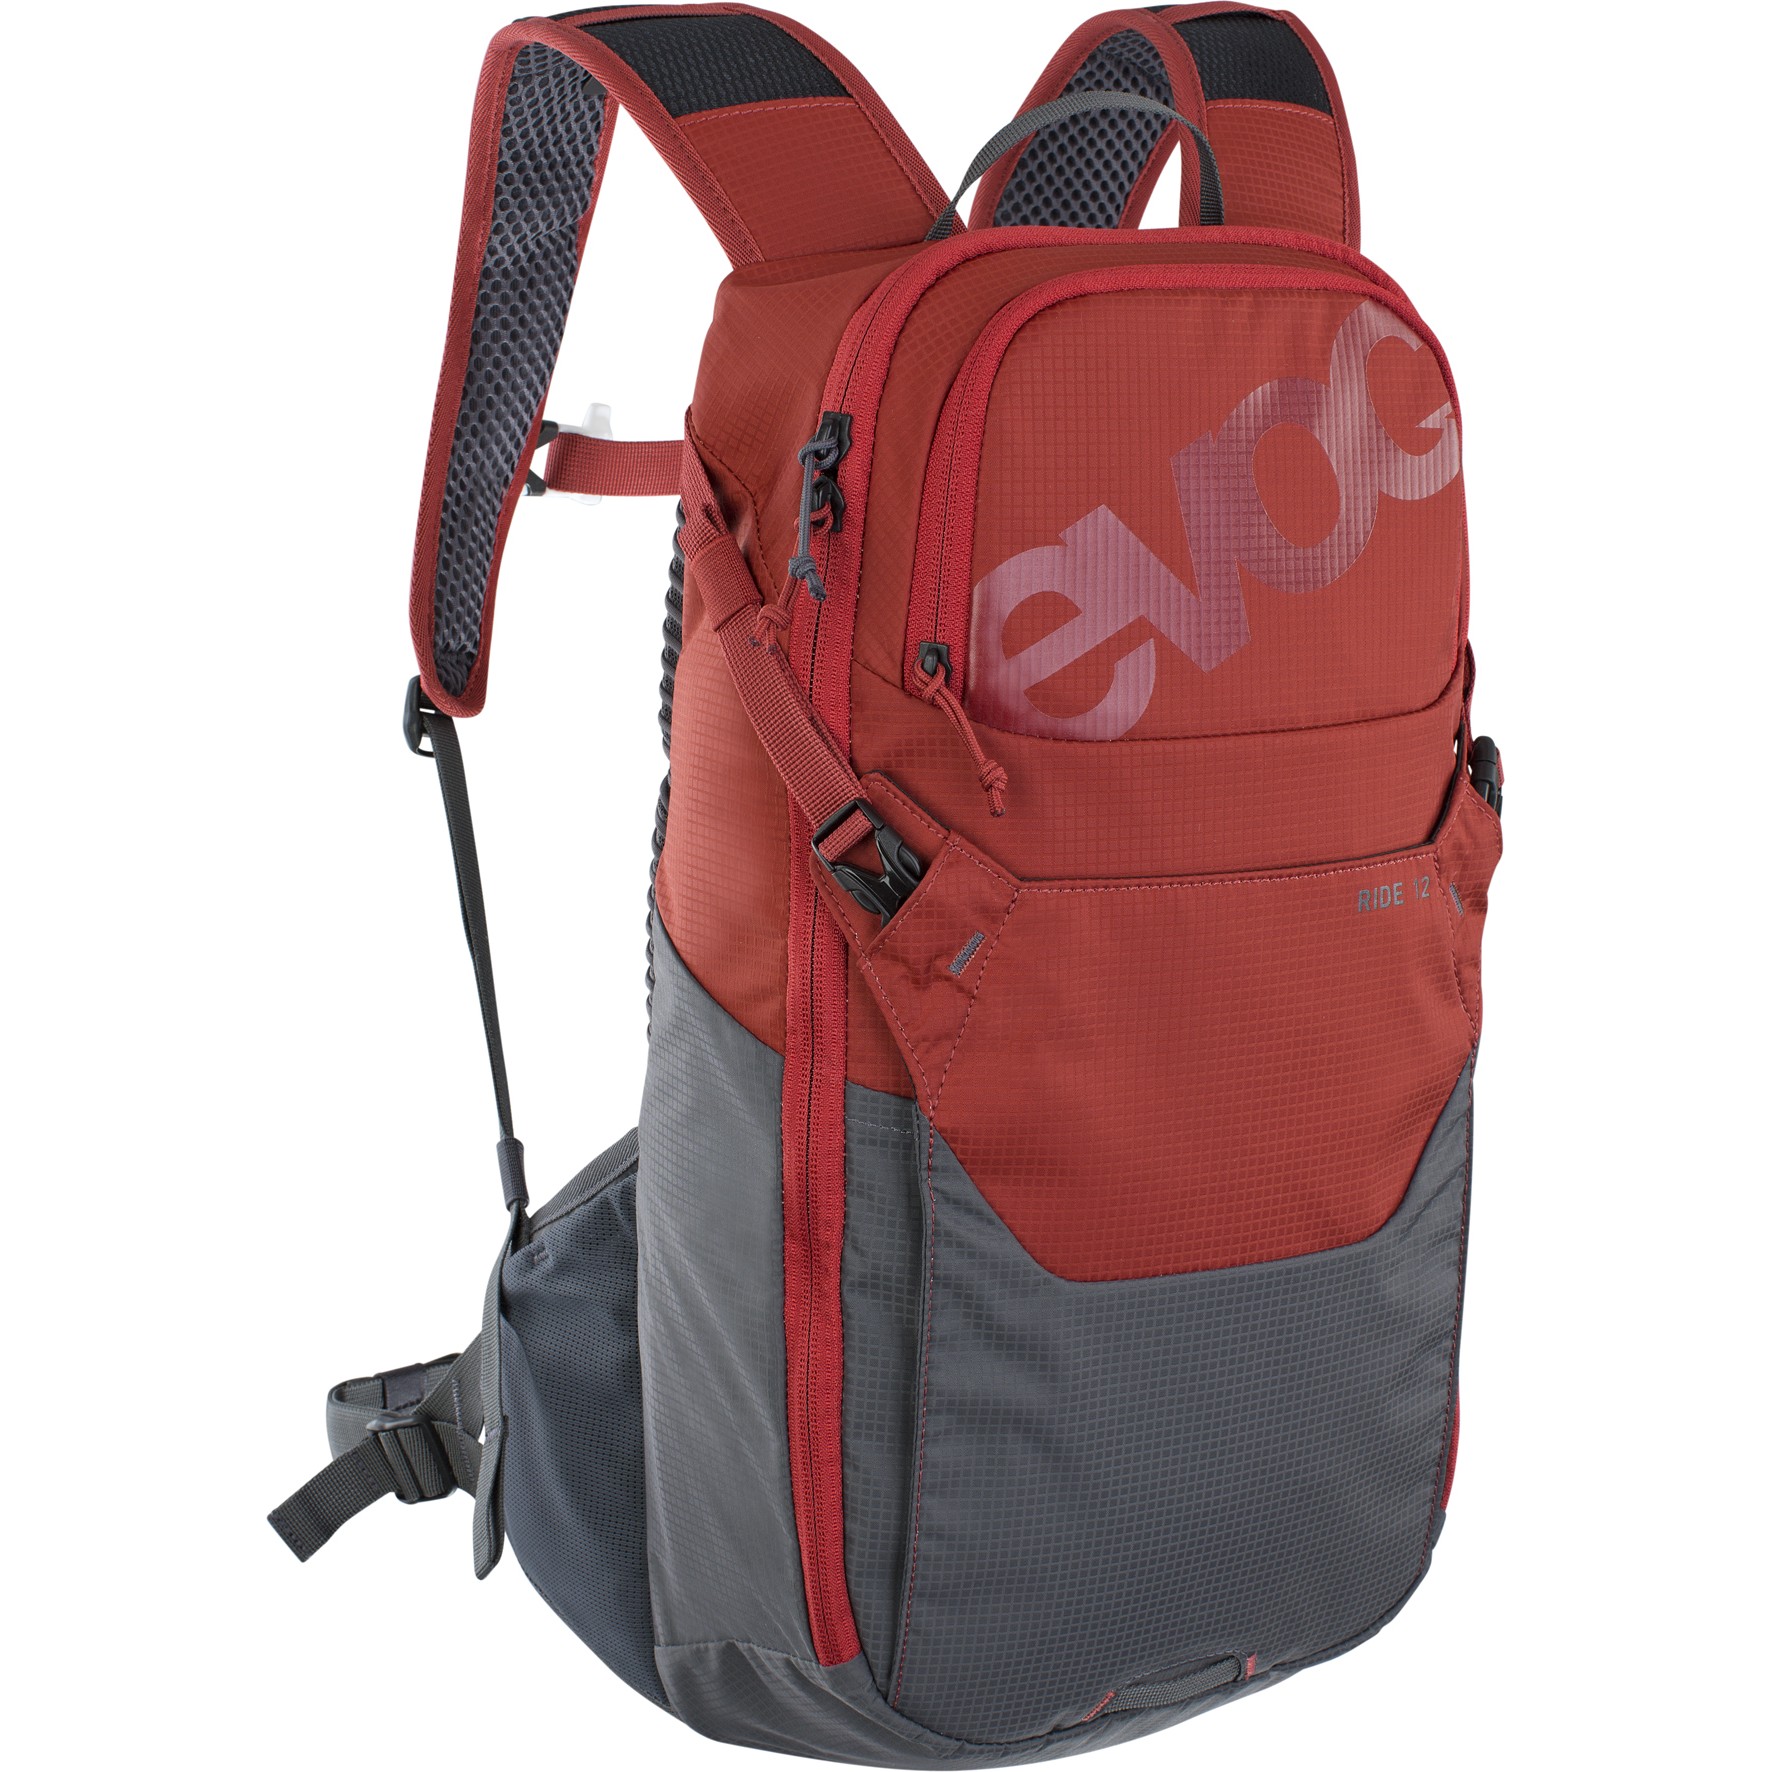 Image of EVOC Ride 12L Backpack - Chili Red / Carbon Grey